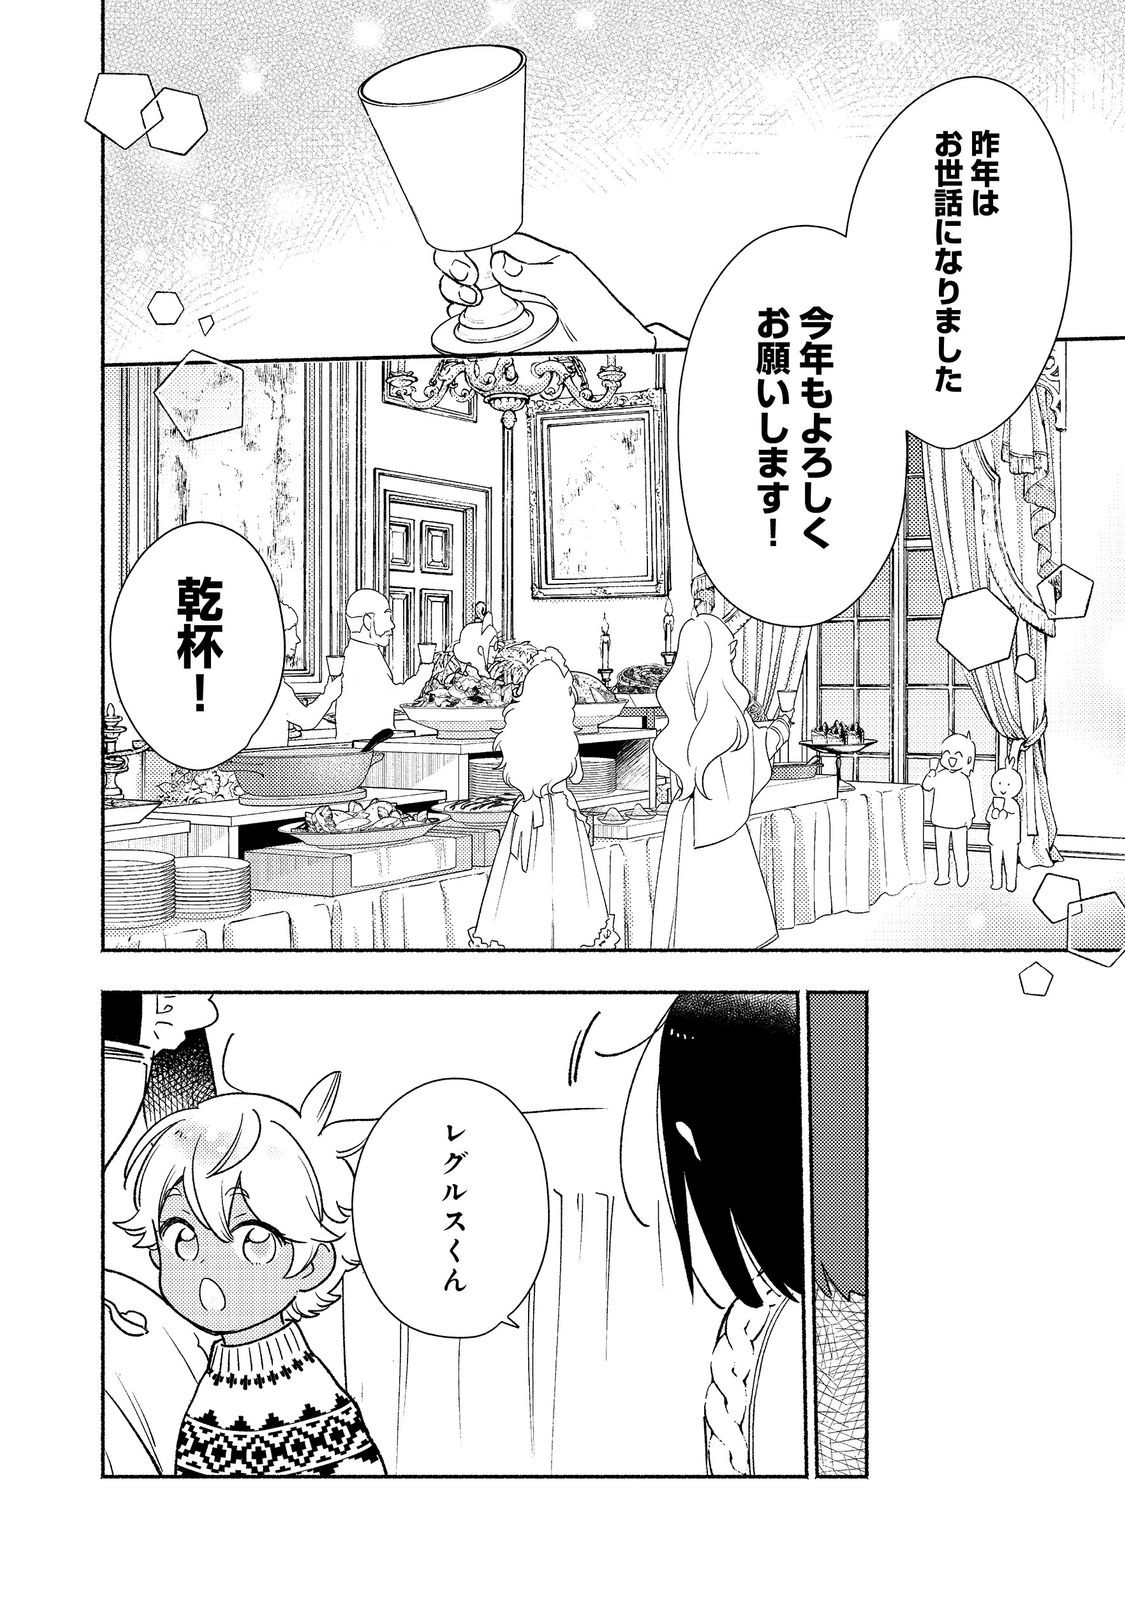 I’m the White Pig Nobleman 第26.1話 - Page 8